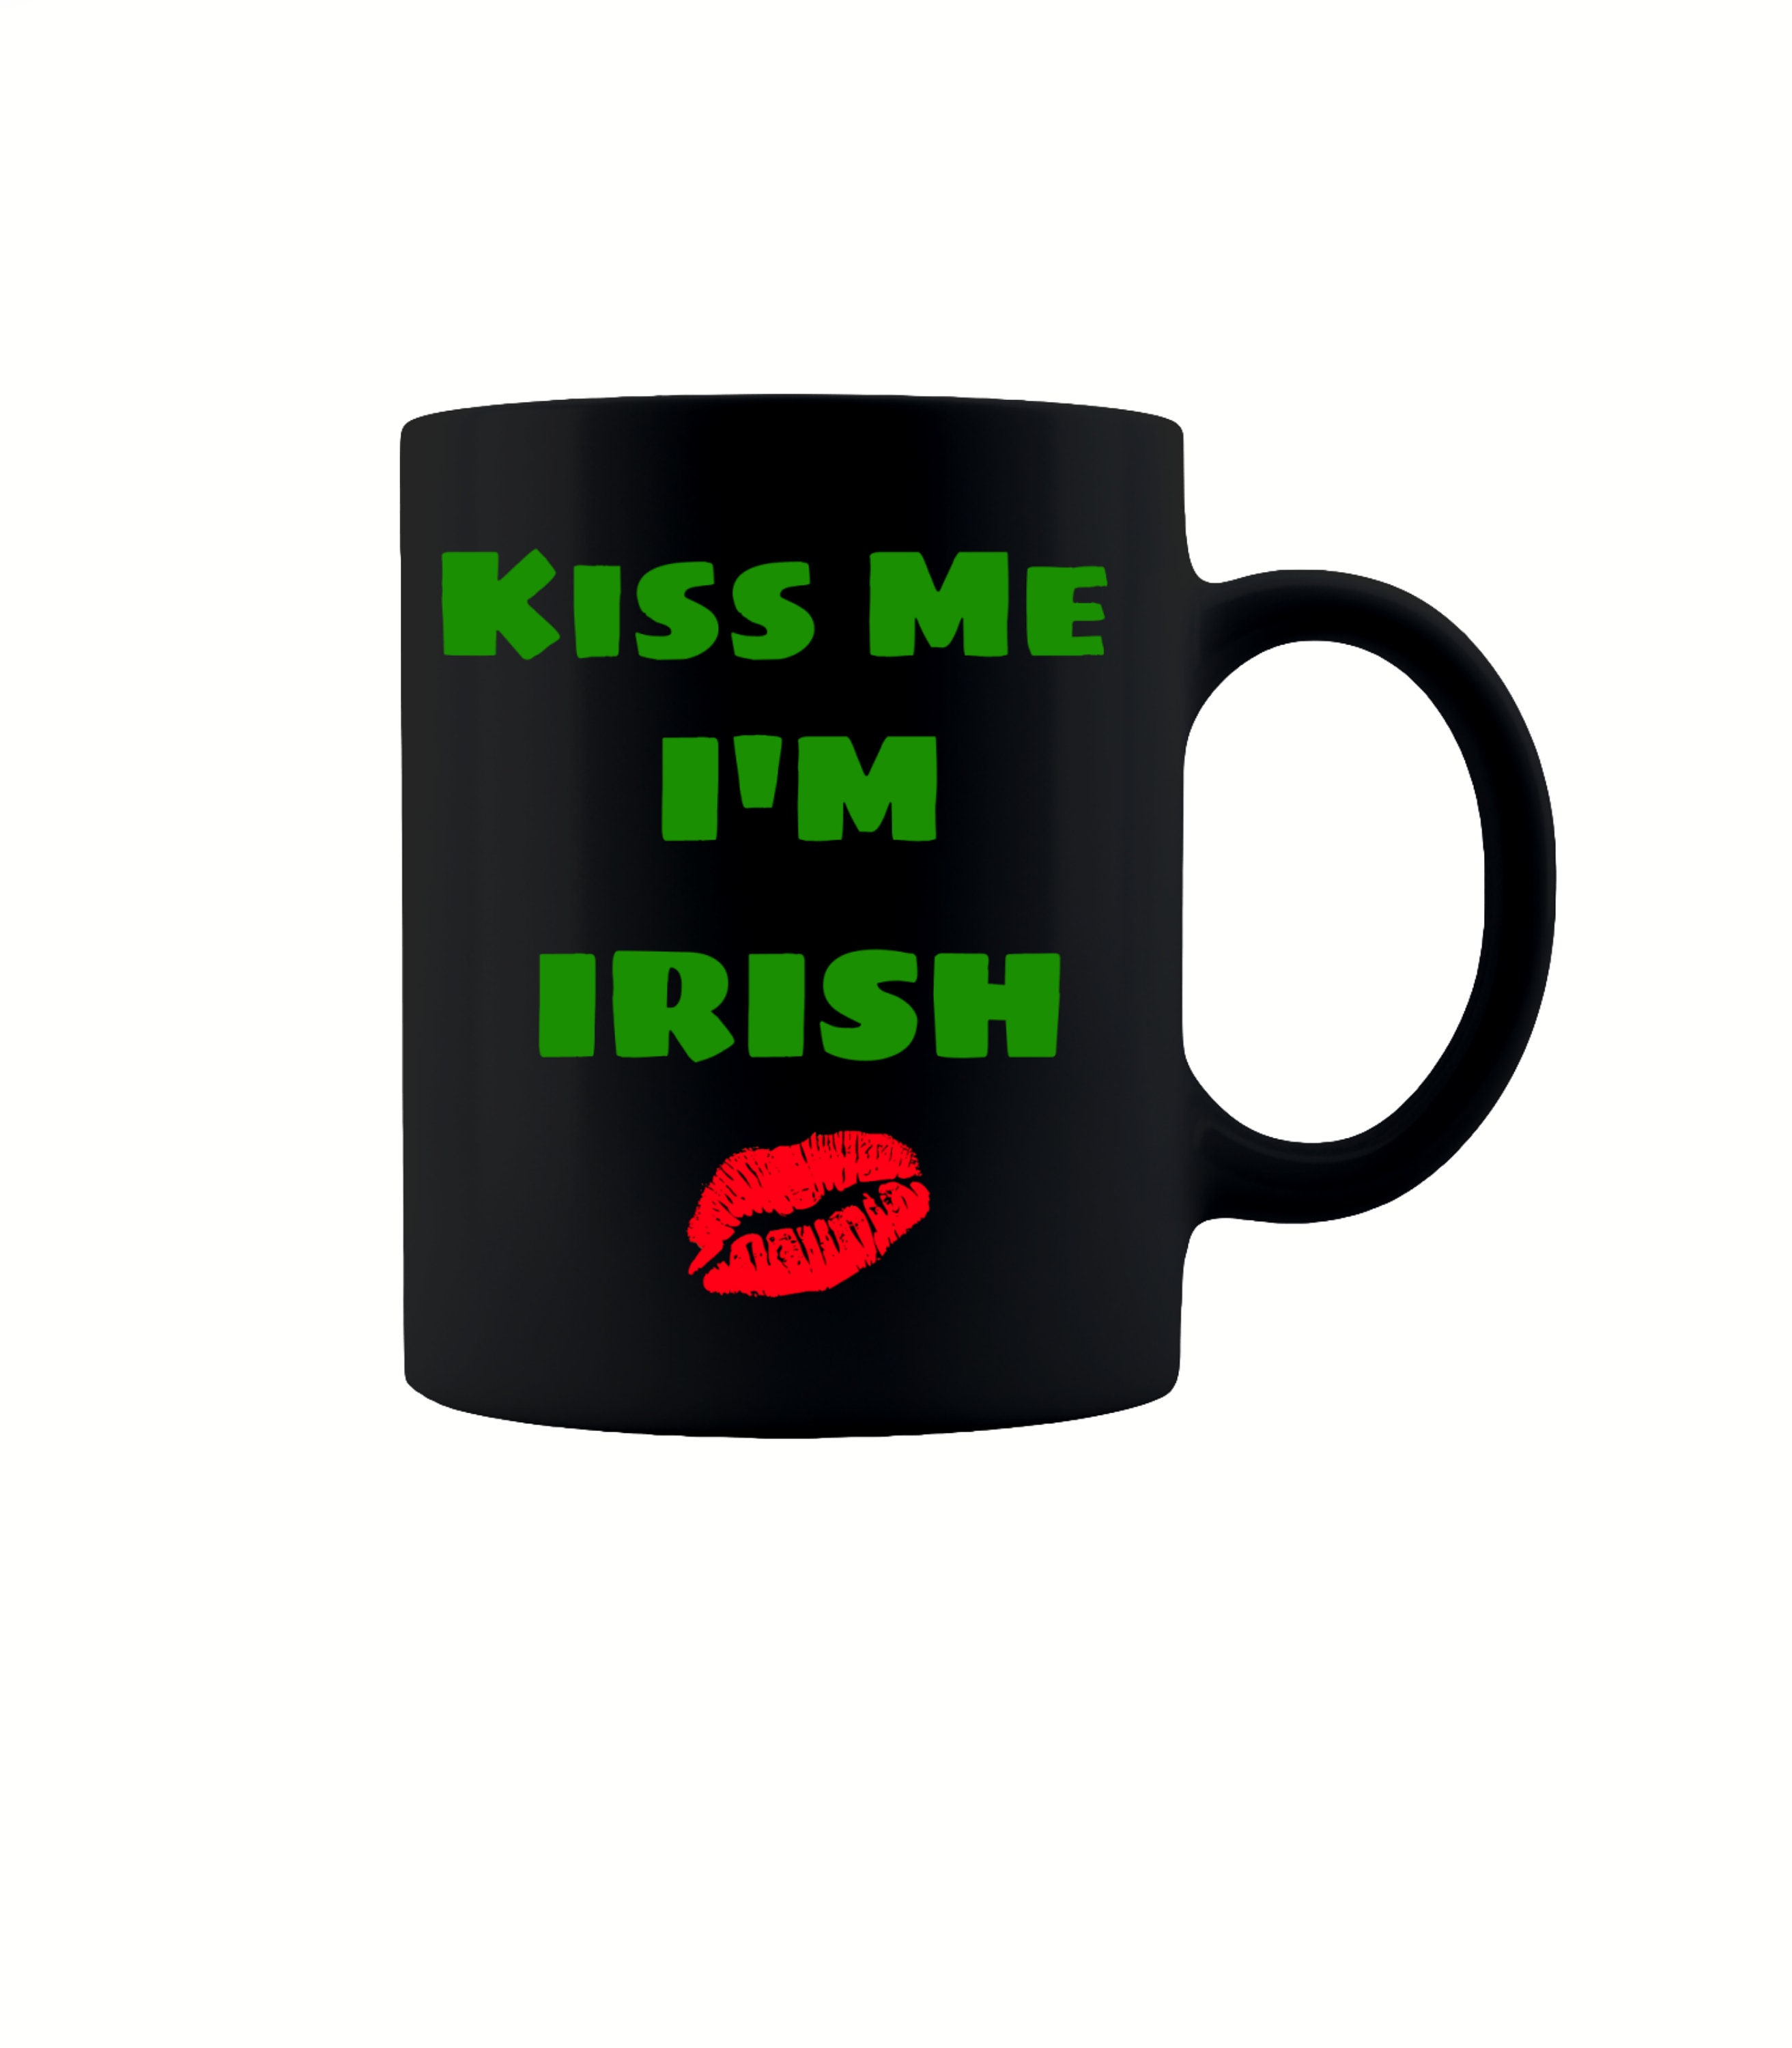 Details about   I'm A Doctor Kiss Me St Patrick's Day Mug Funny Doctor Mug St Patrick's Day Gift 